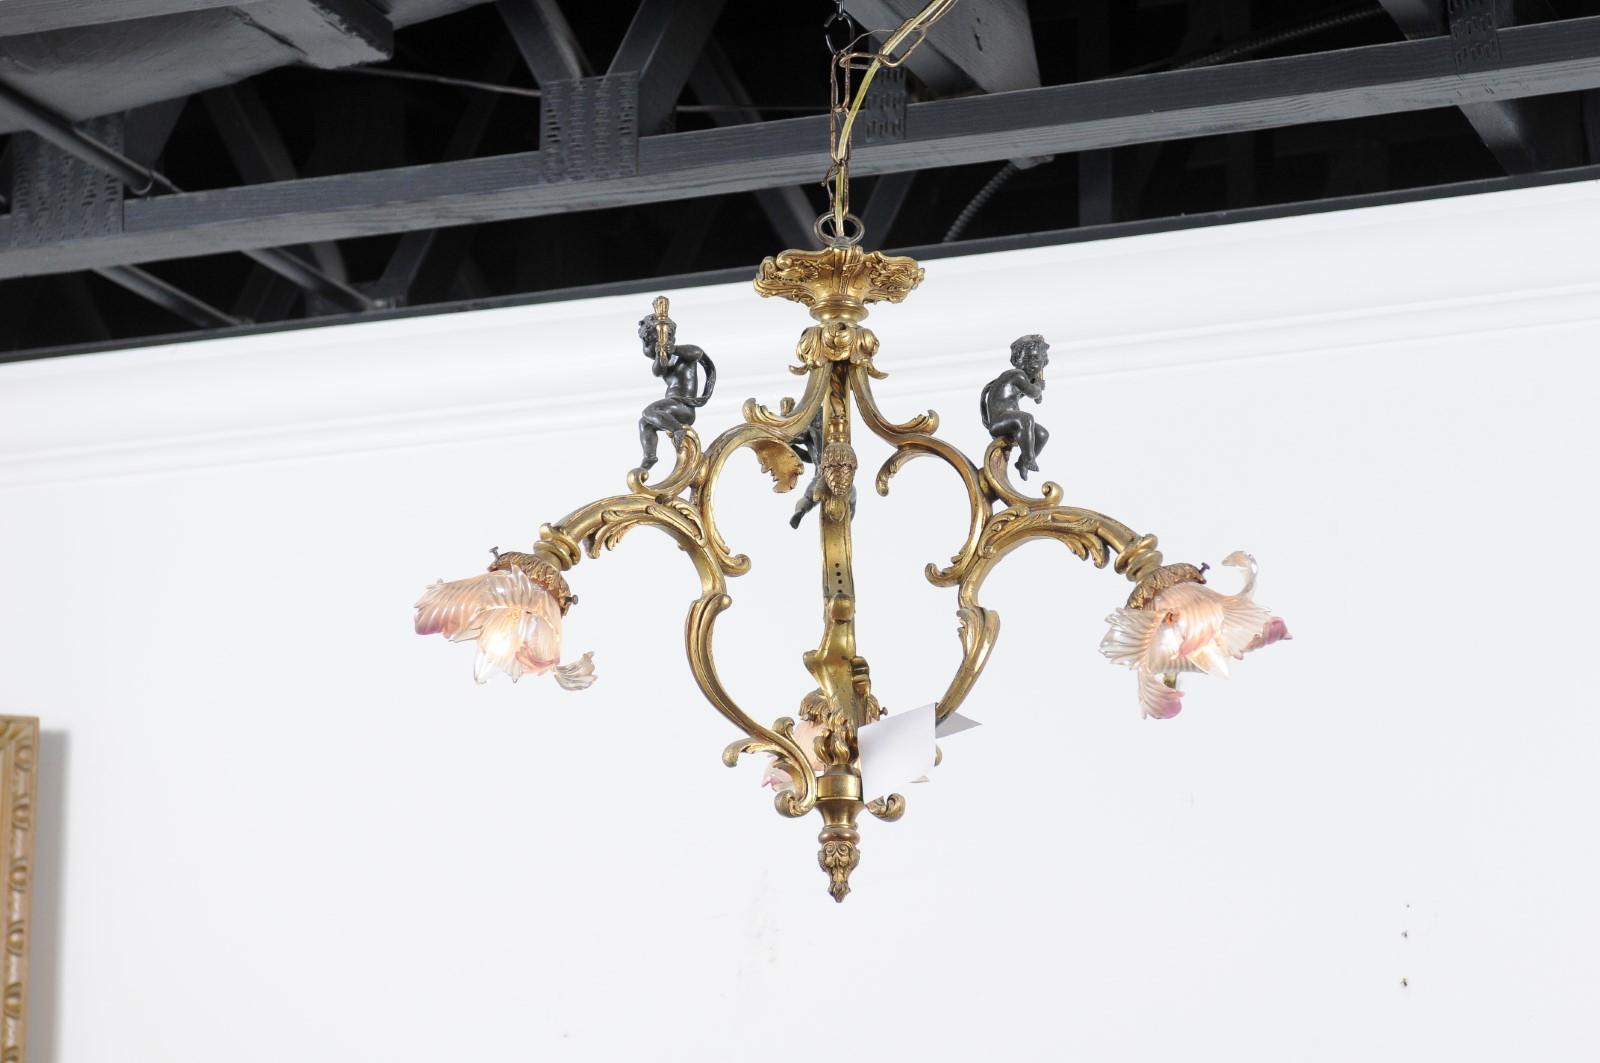 A French gilt bronze three-light chandelier from the 19th century, with three putti holding torches and hand-blow glass bobèches. Born in France during the 19th century, this three-arm chandelier captures our attention with its Rococo curves and